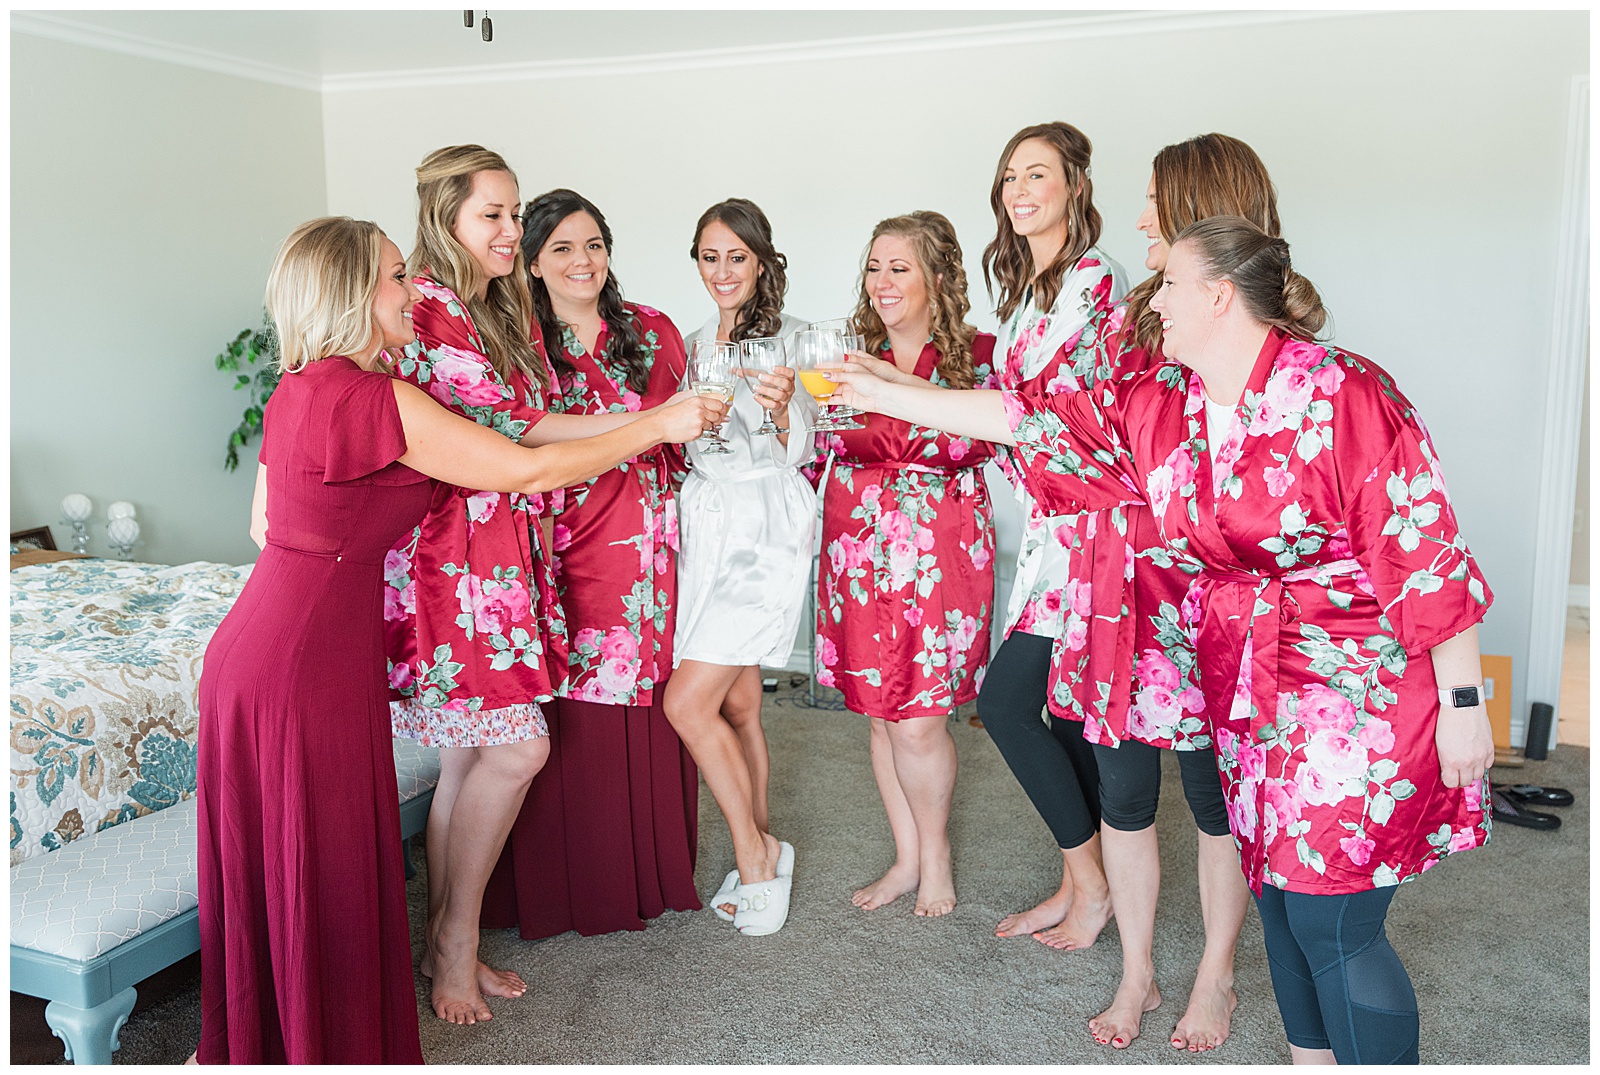 group of women holding champagne glasses smiling and wearing pink robes